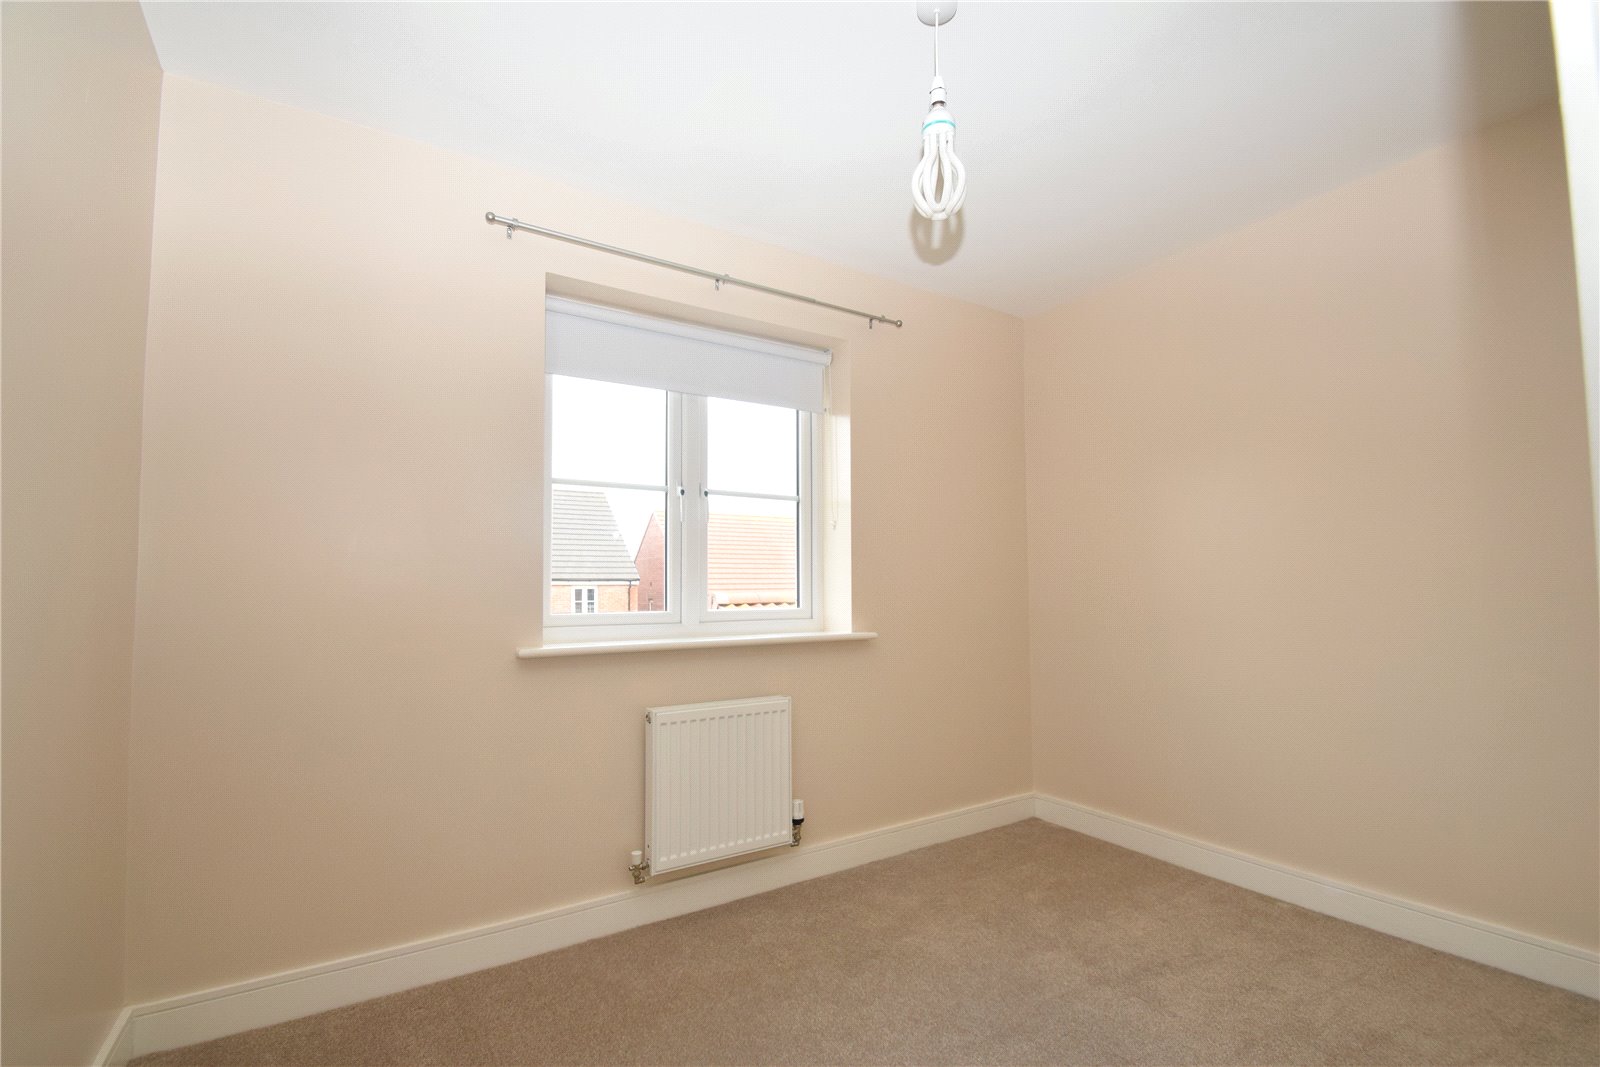 4 bed house for sale in Badger Lane, Middle Deepdale  - Property Image 14